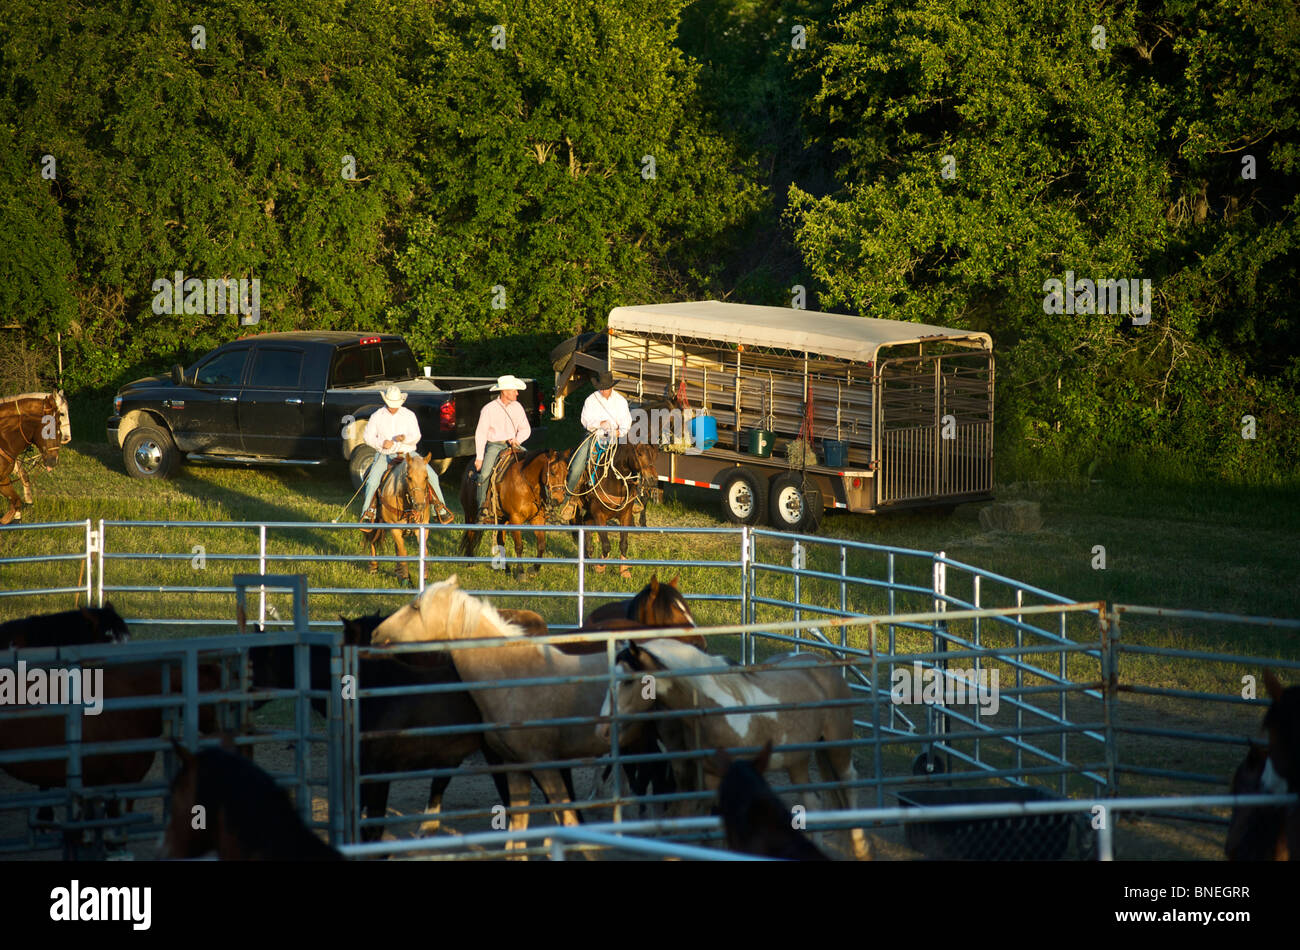 Cowboy members of PRCA riding horses backstage at rodeo event in Bridgeport, Texas, USA Stock Photo